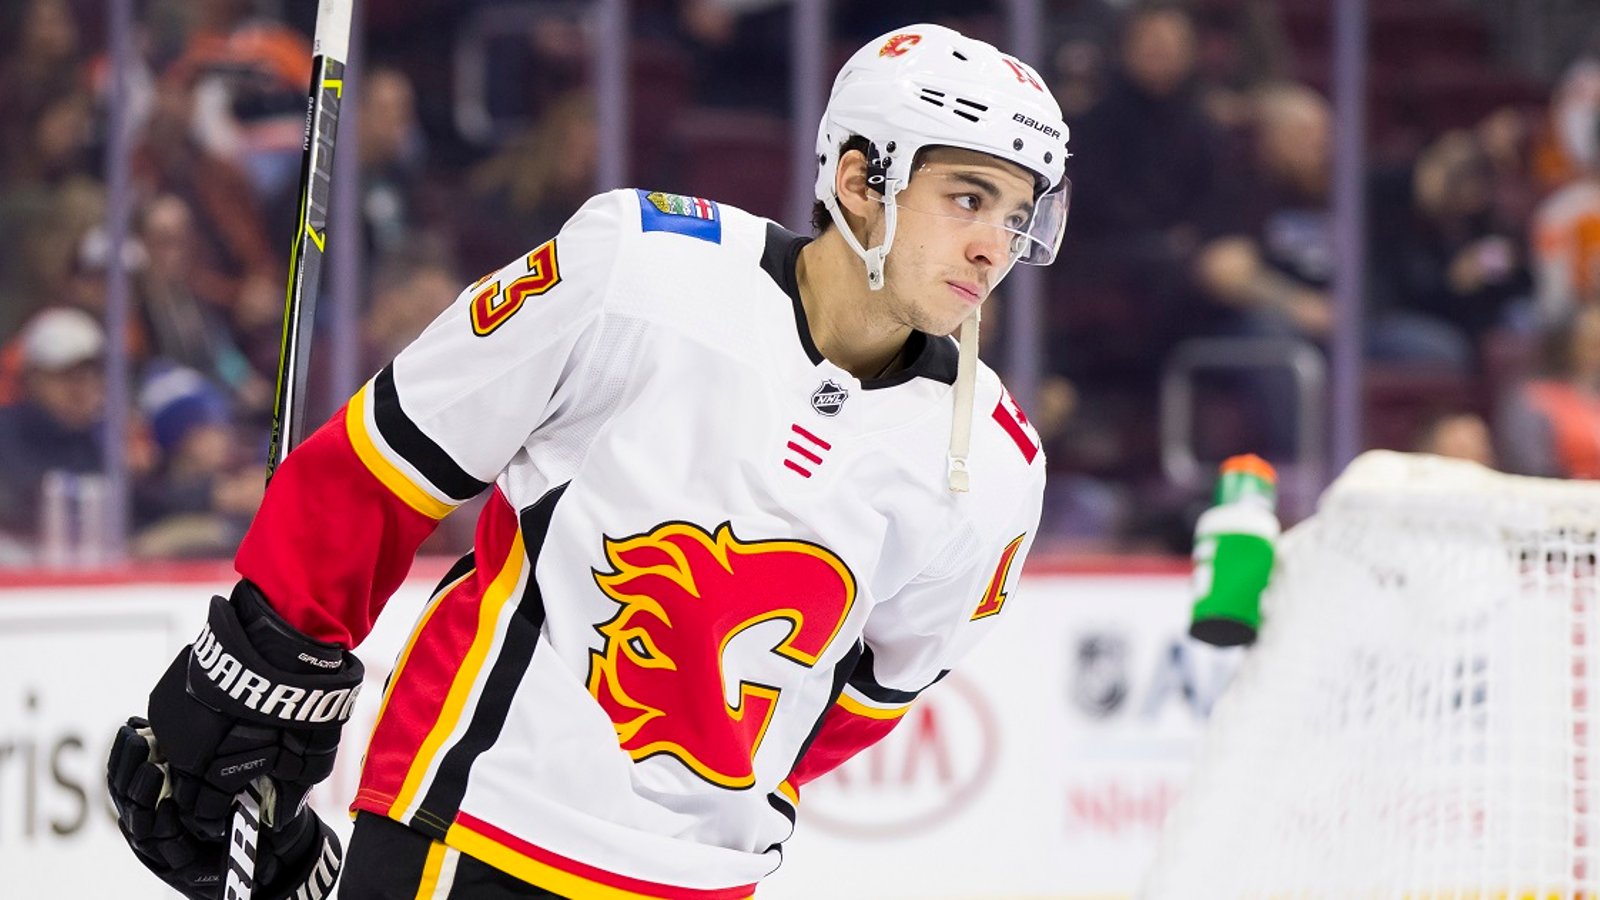 Johnny Gaudreau will get a special surprise on the bench during the All Star game.